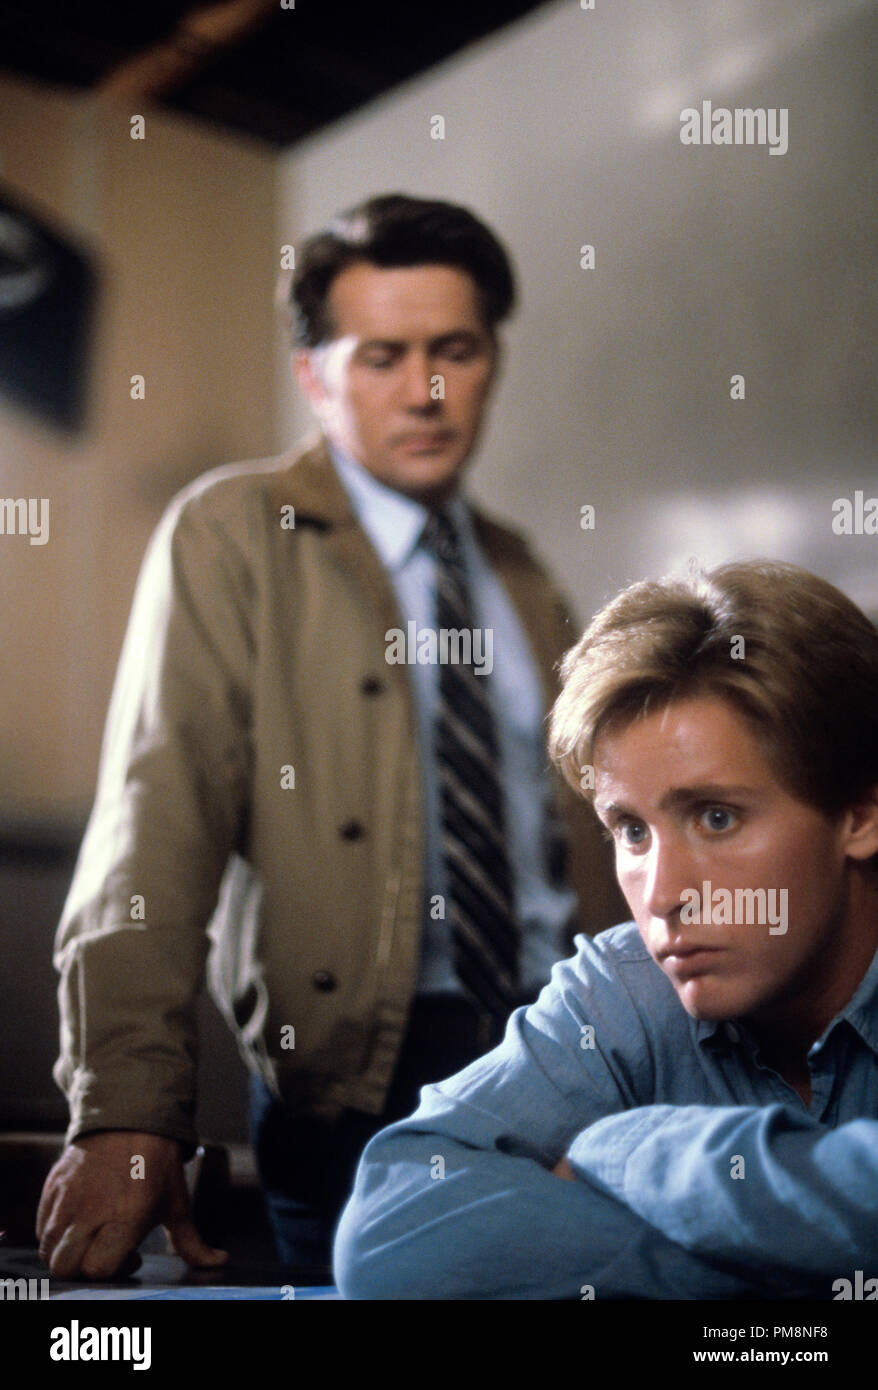 Studio Publicity Still from 'In the Custody of Strangers' Martin Sheen, Emilio Estevez 1982  All Rights Reserved   File Reference # 31710175THA  For Editorial Use Only Stock Photo